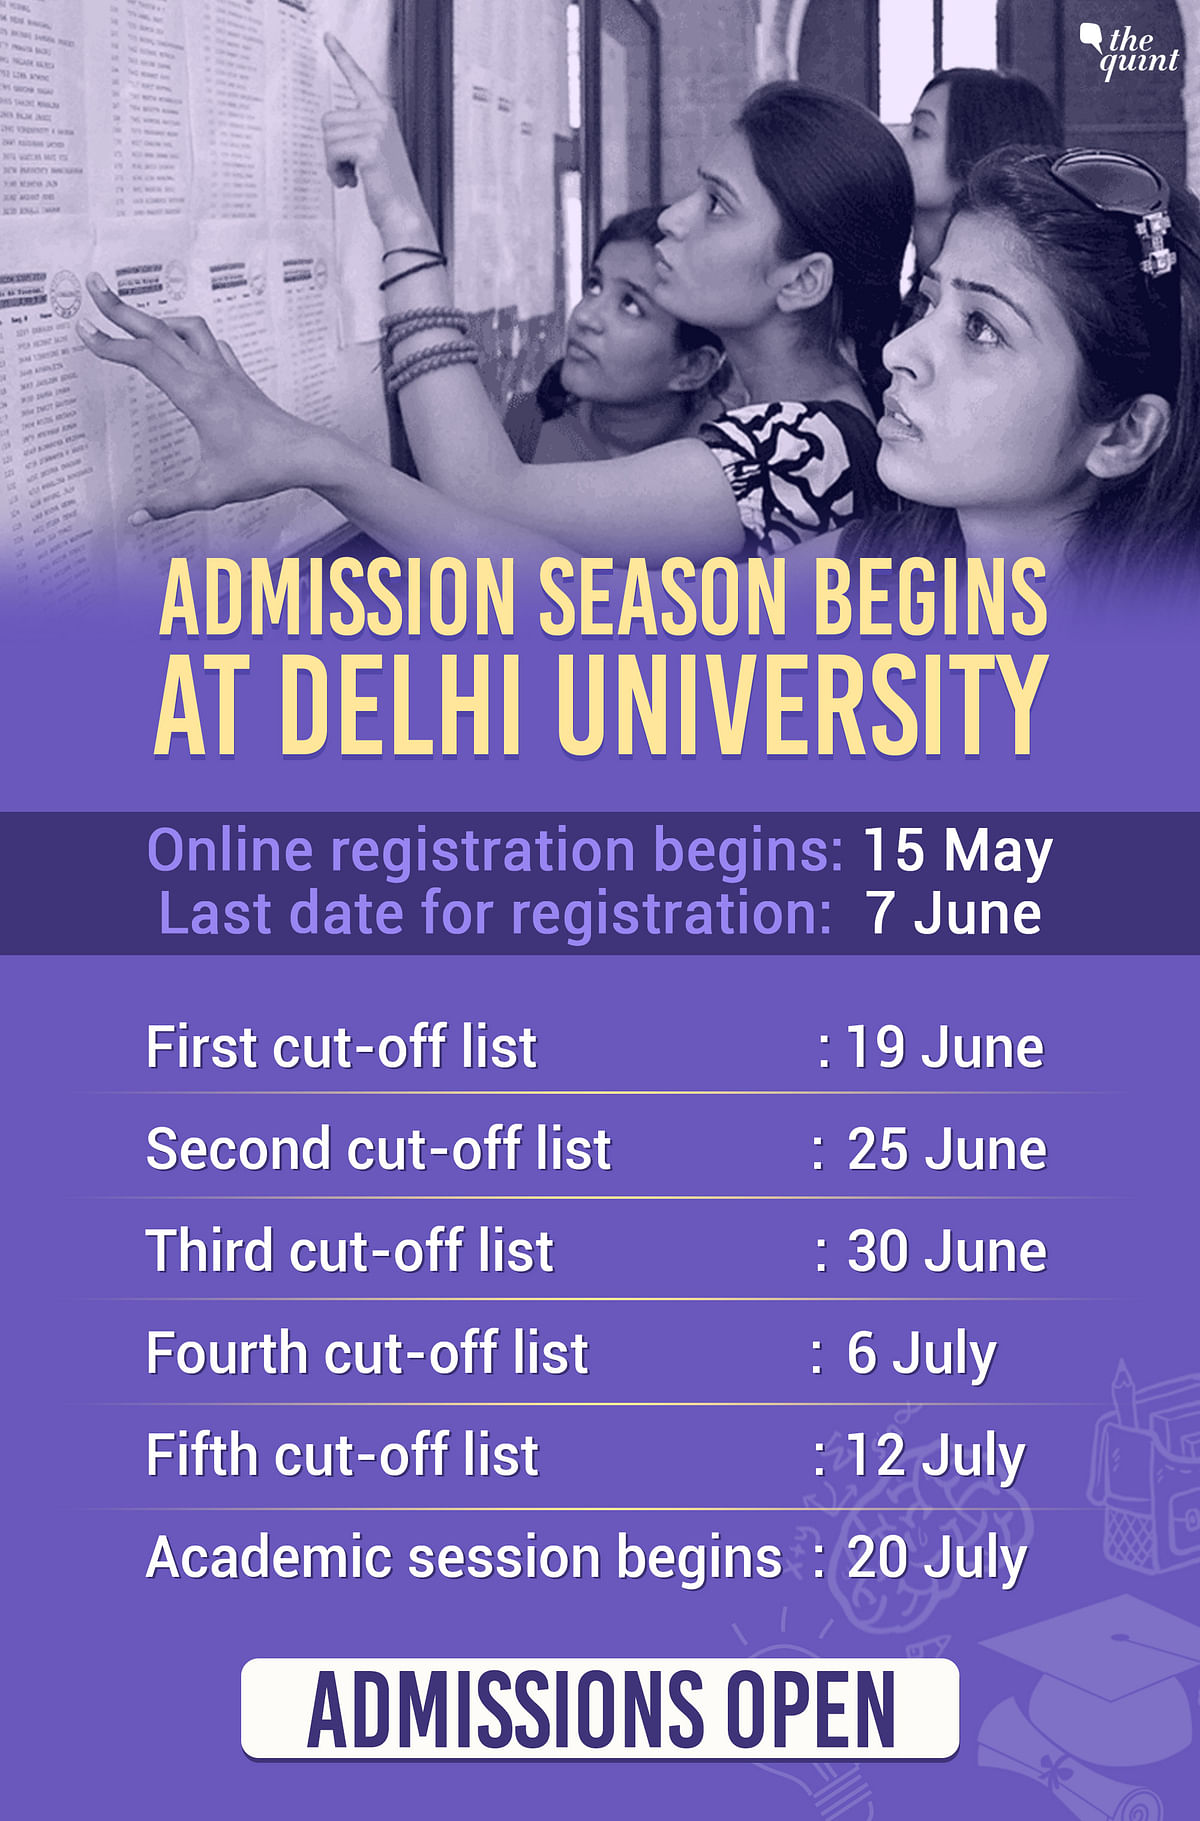 DU Admissions 2018: This year, the registration process will be completely online for all categories and all quotas.